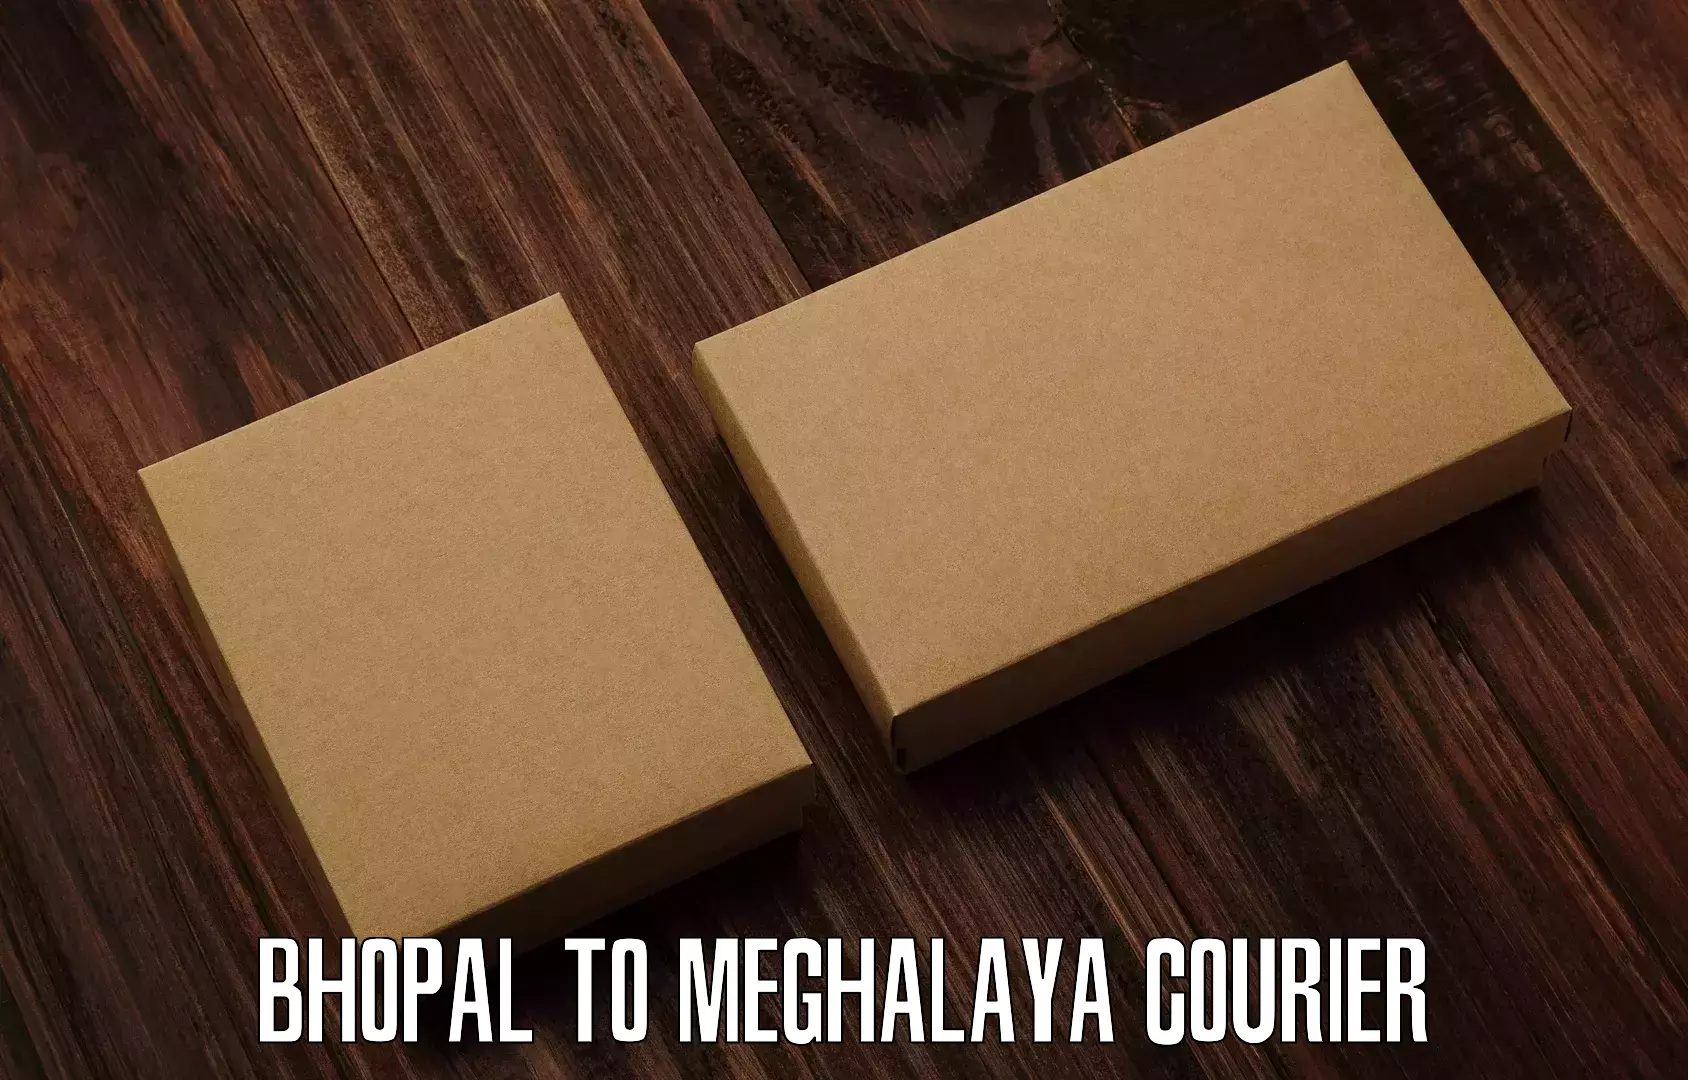 24/7 courier service Bhopal to Shillong